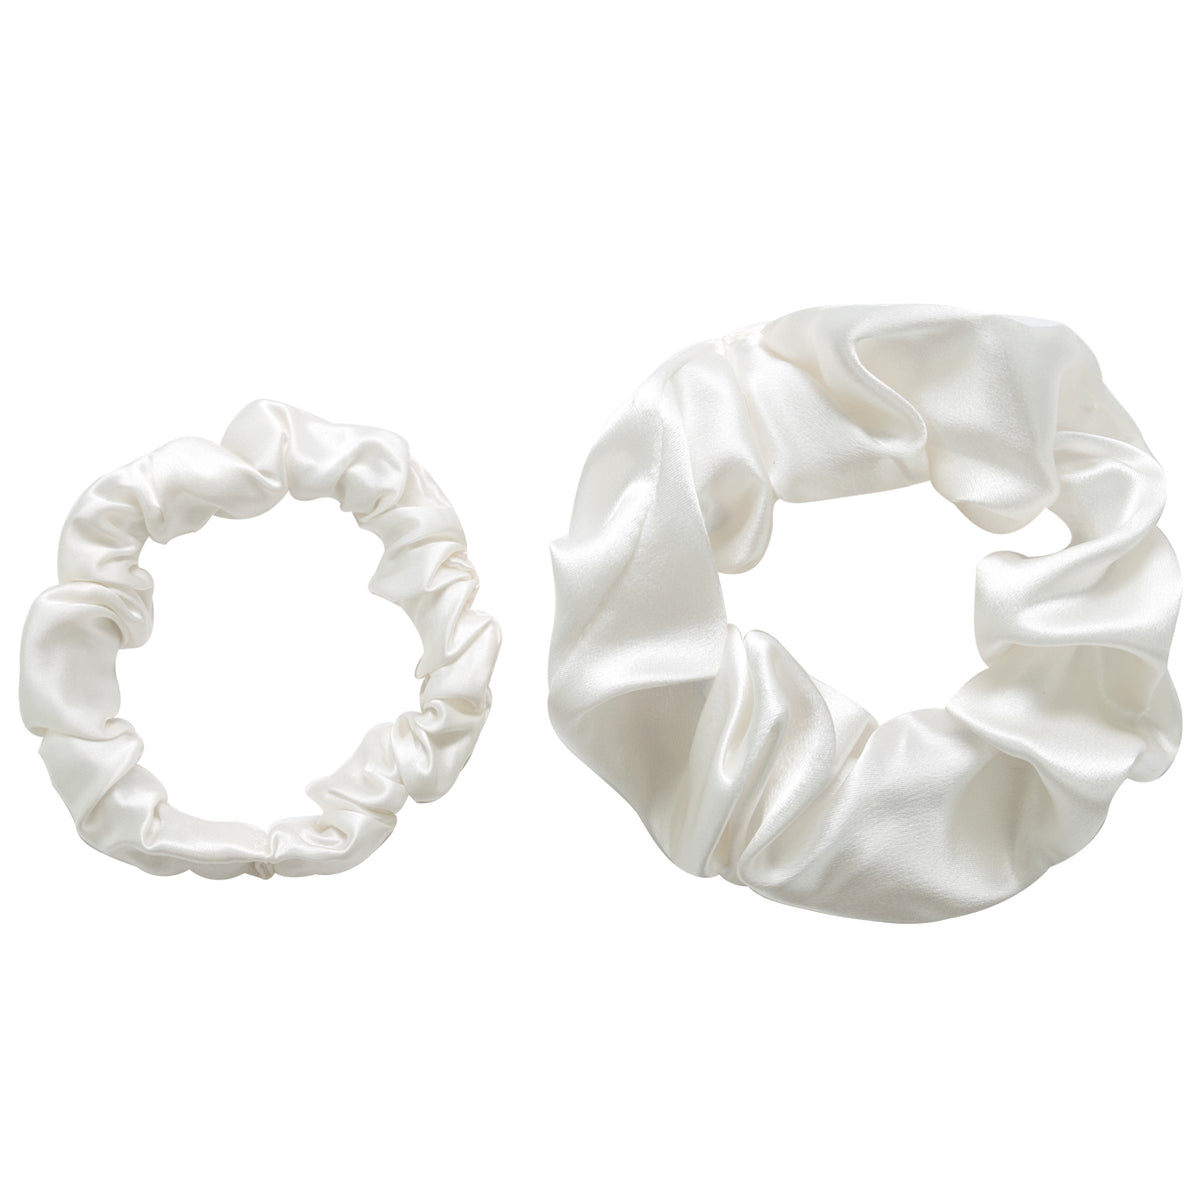 Pure Silk Scrunchie Pack - 1 thick 1 thin - Holds hair without damage, no snags, anti-pulling (Black